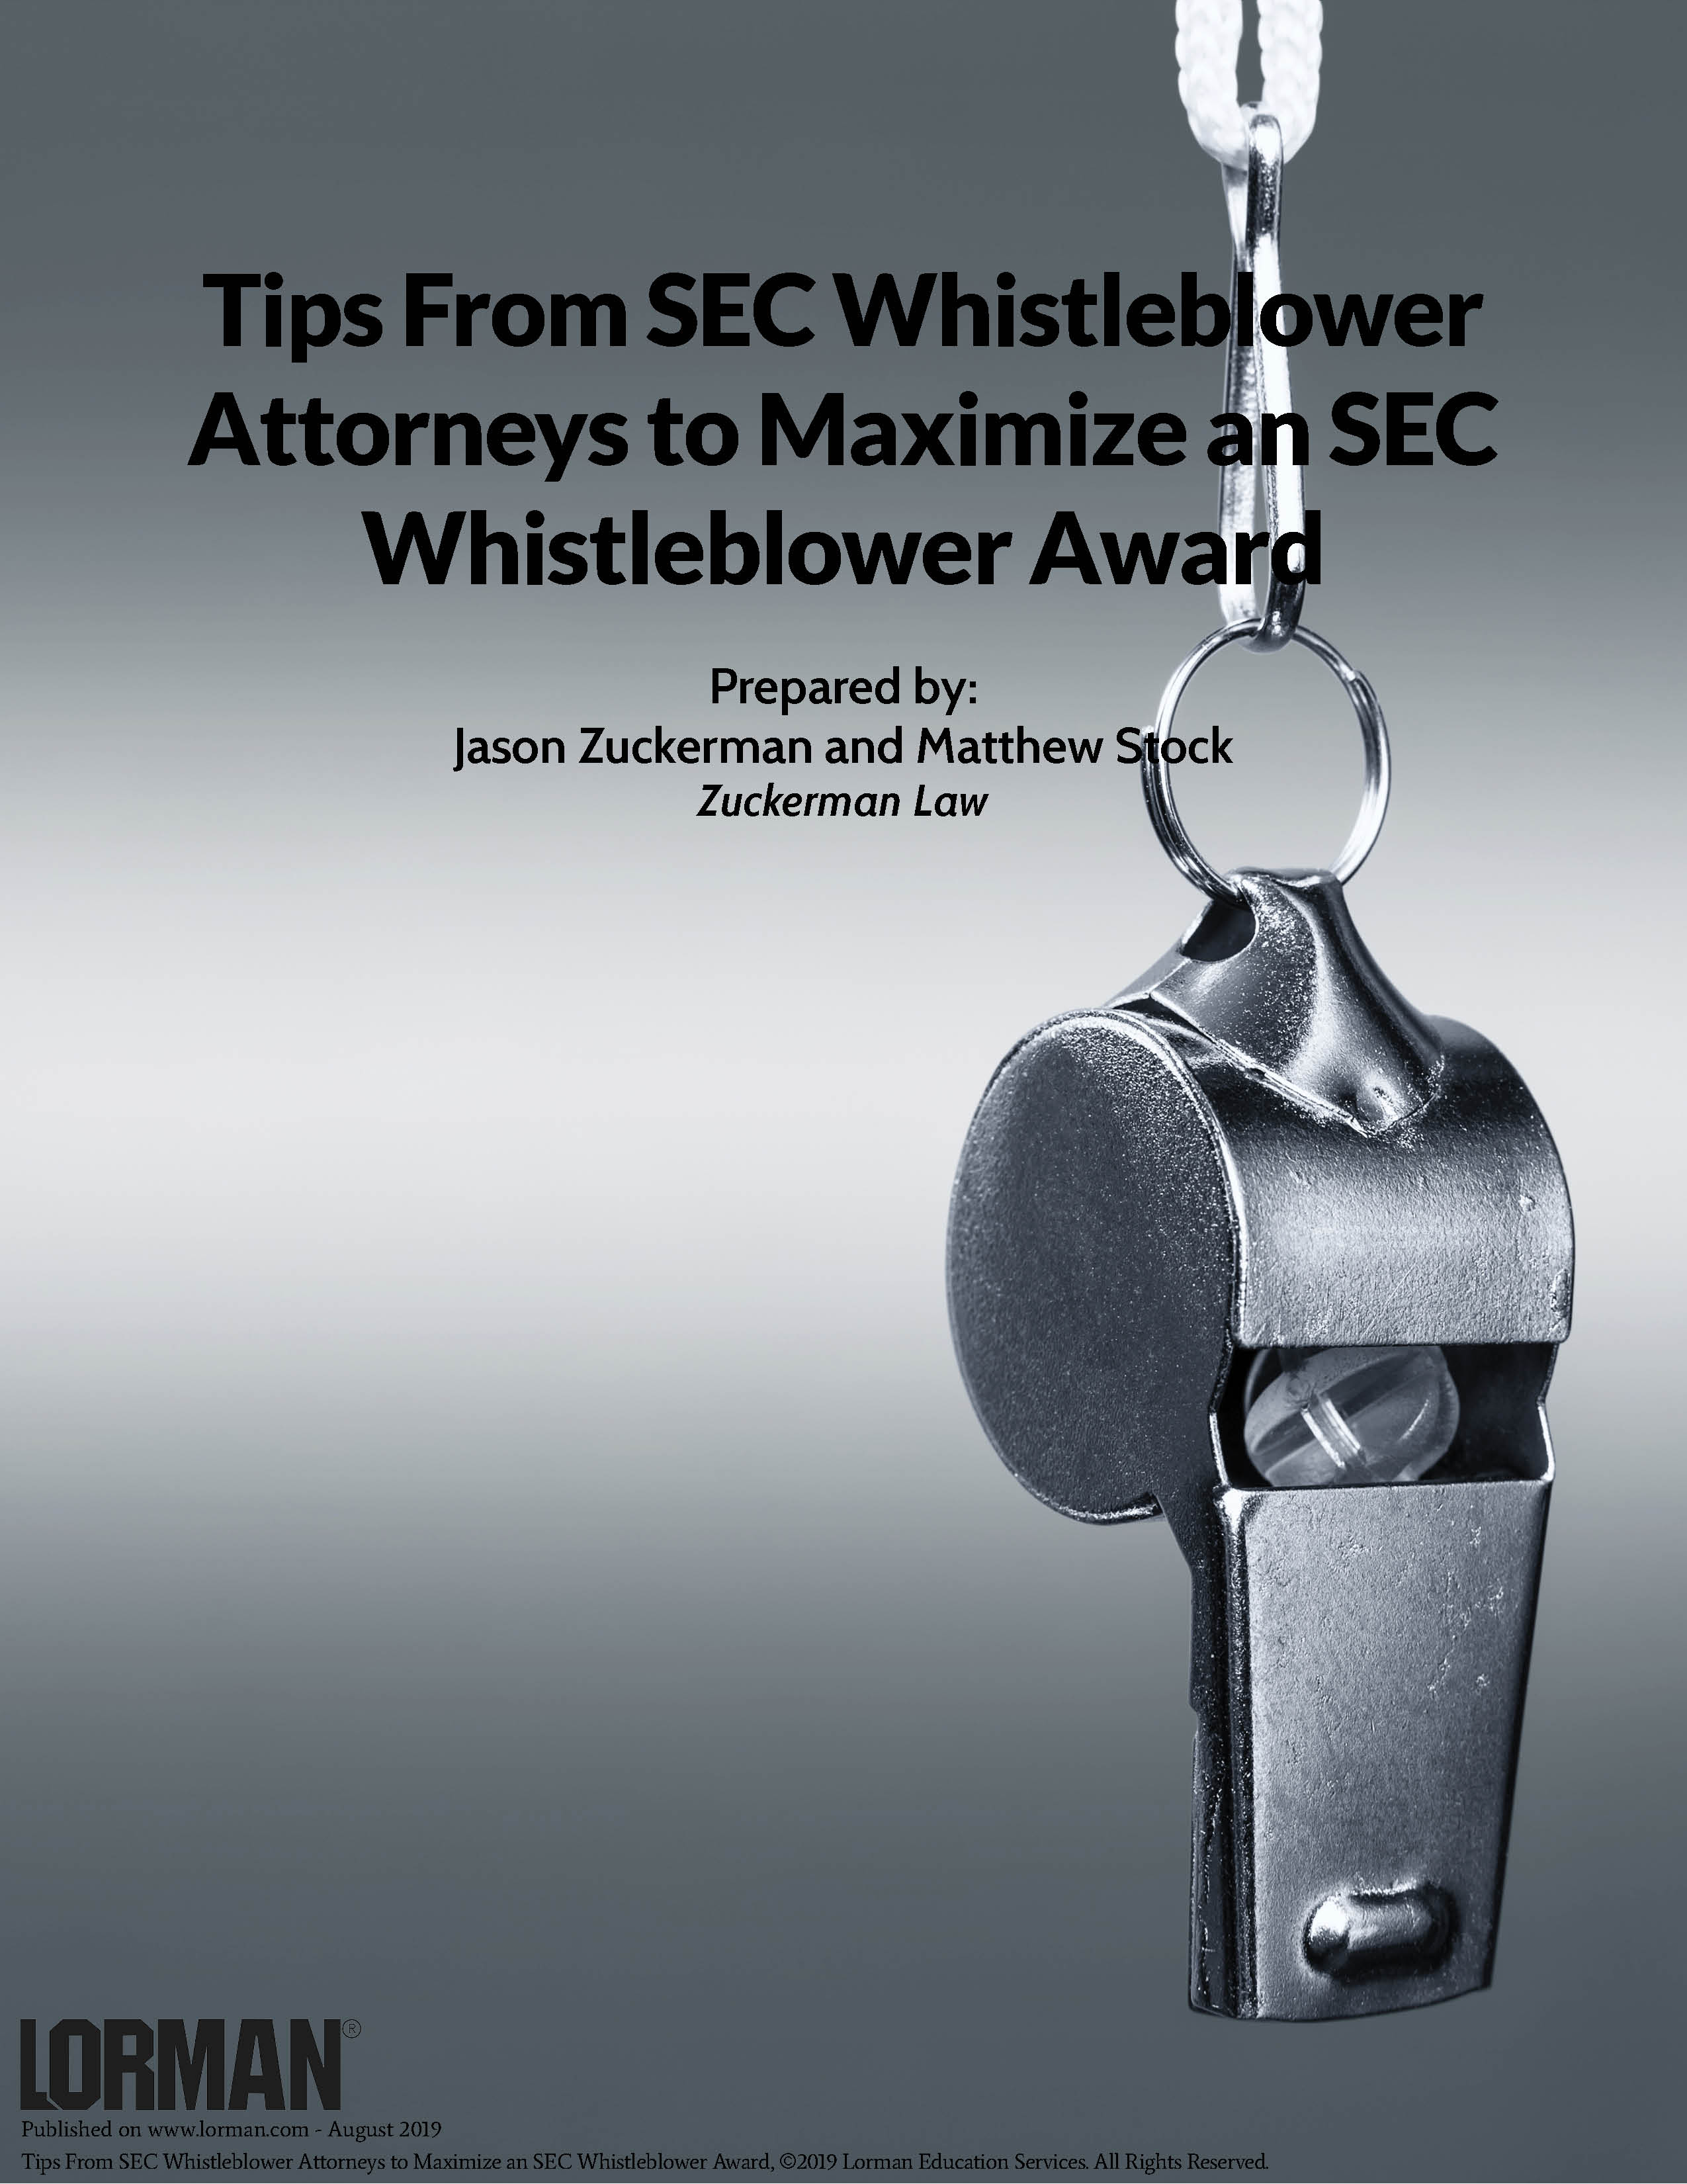 Tips From SEC Whistleblower Attorneys to Maximize an SEC Whistleblower Award